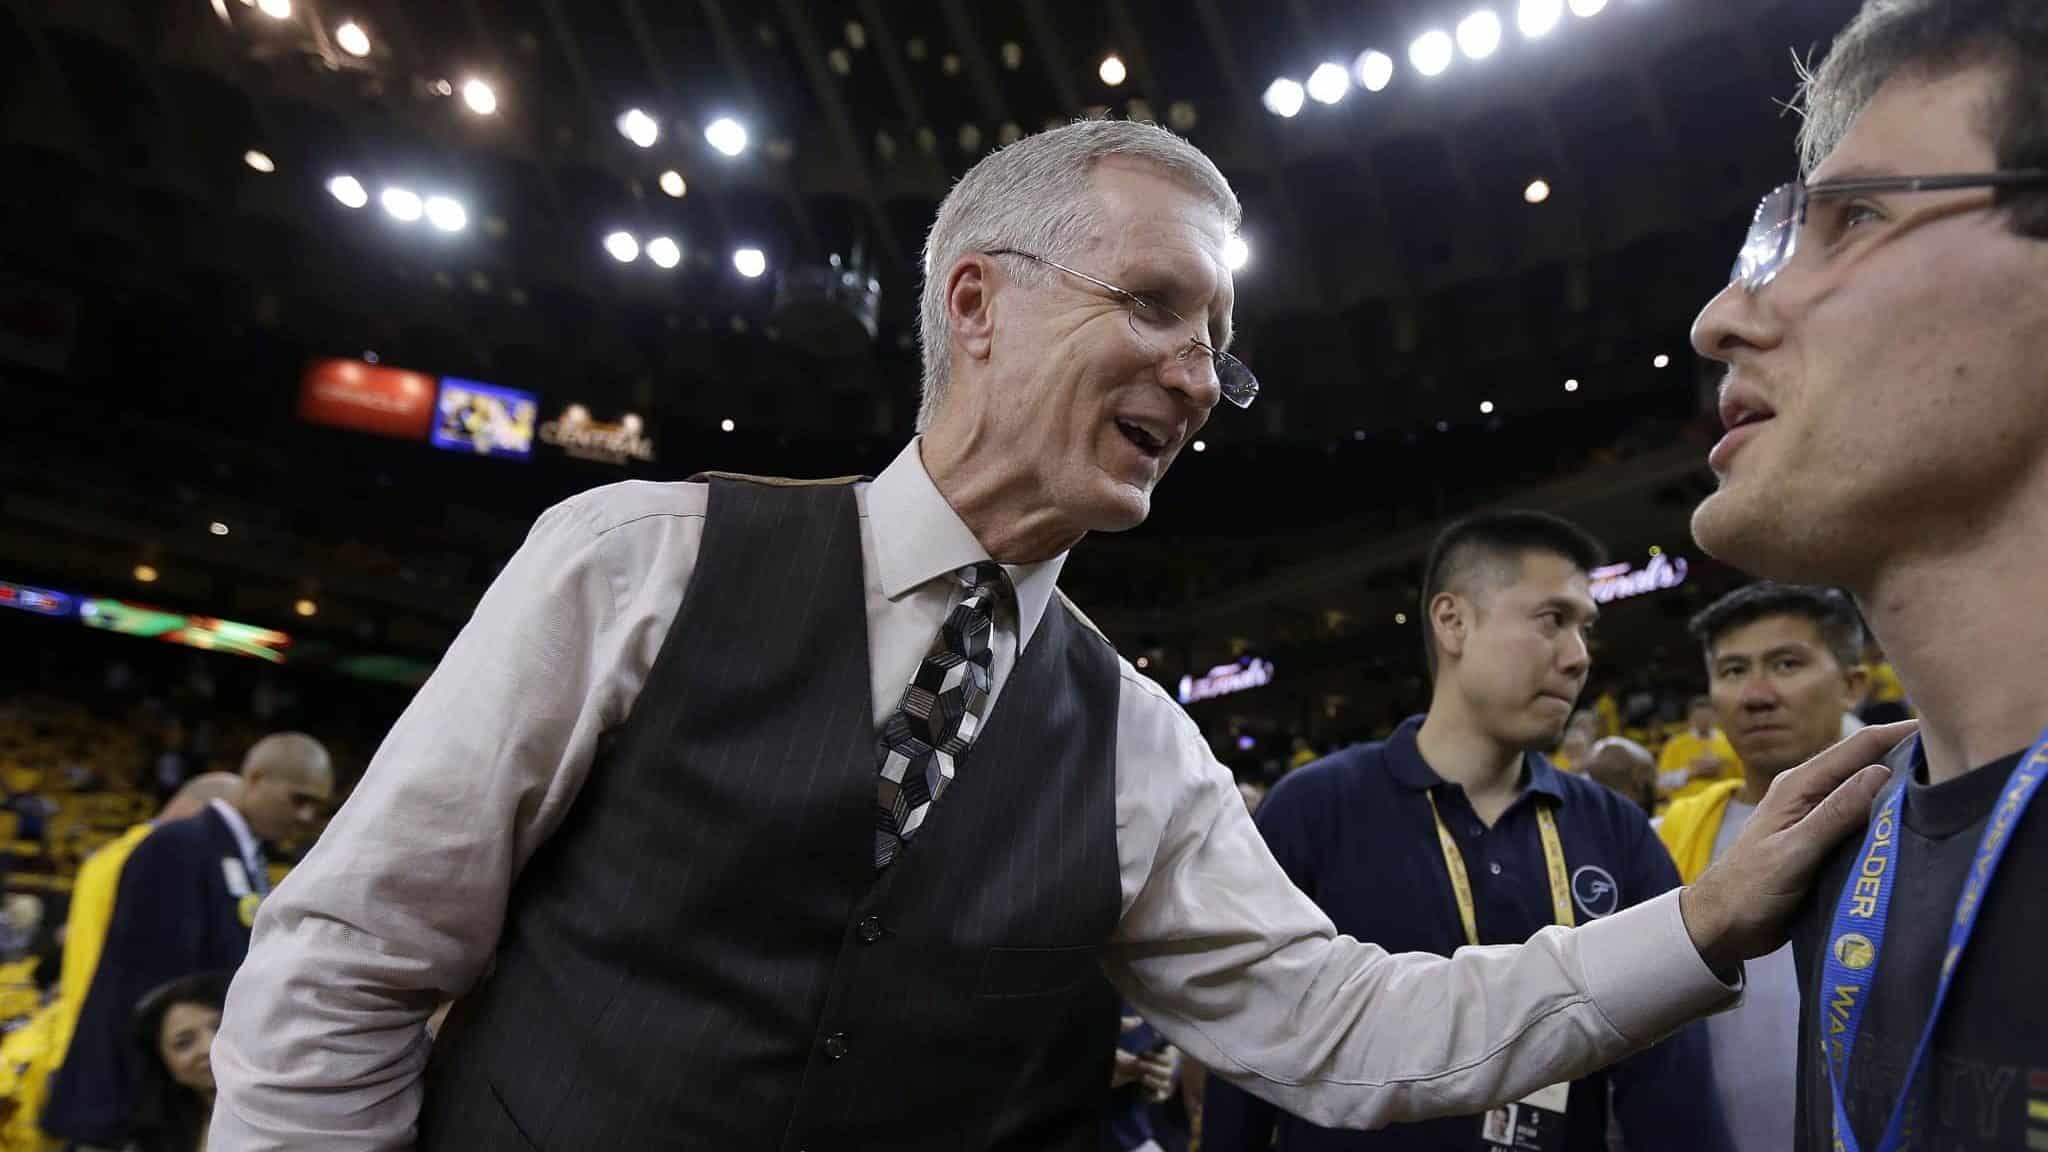 In this June 4, 2015, photo, Mike Breen, NBA play-by-play sports commentator for ABC, greets fans before Game 1 of basketball's NBA Finals between the Golden State Warriors and Cleveland Cavaliers in Oakland, Calif. Breen is calling his 10th NBA Finals, a record for a TV play-by-play announcer.